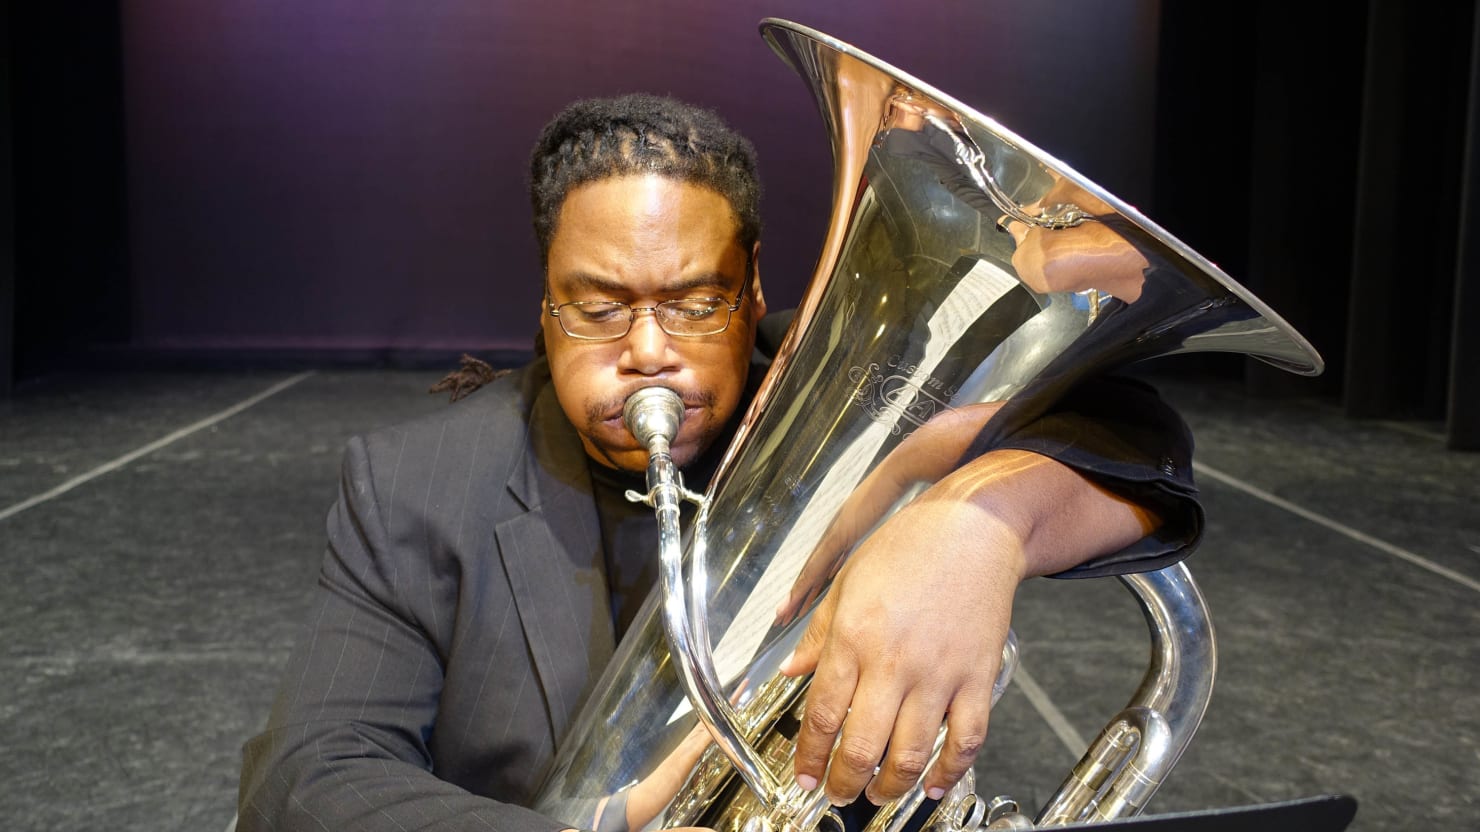 Richard White Was a Homeless Kid. Then, With a Tuba, He Made Music